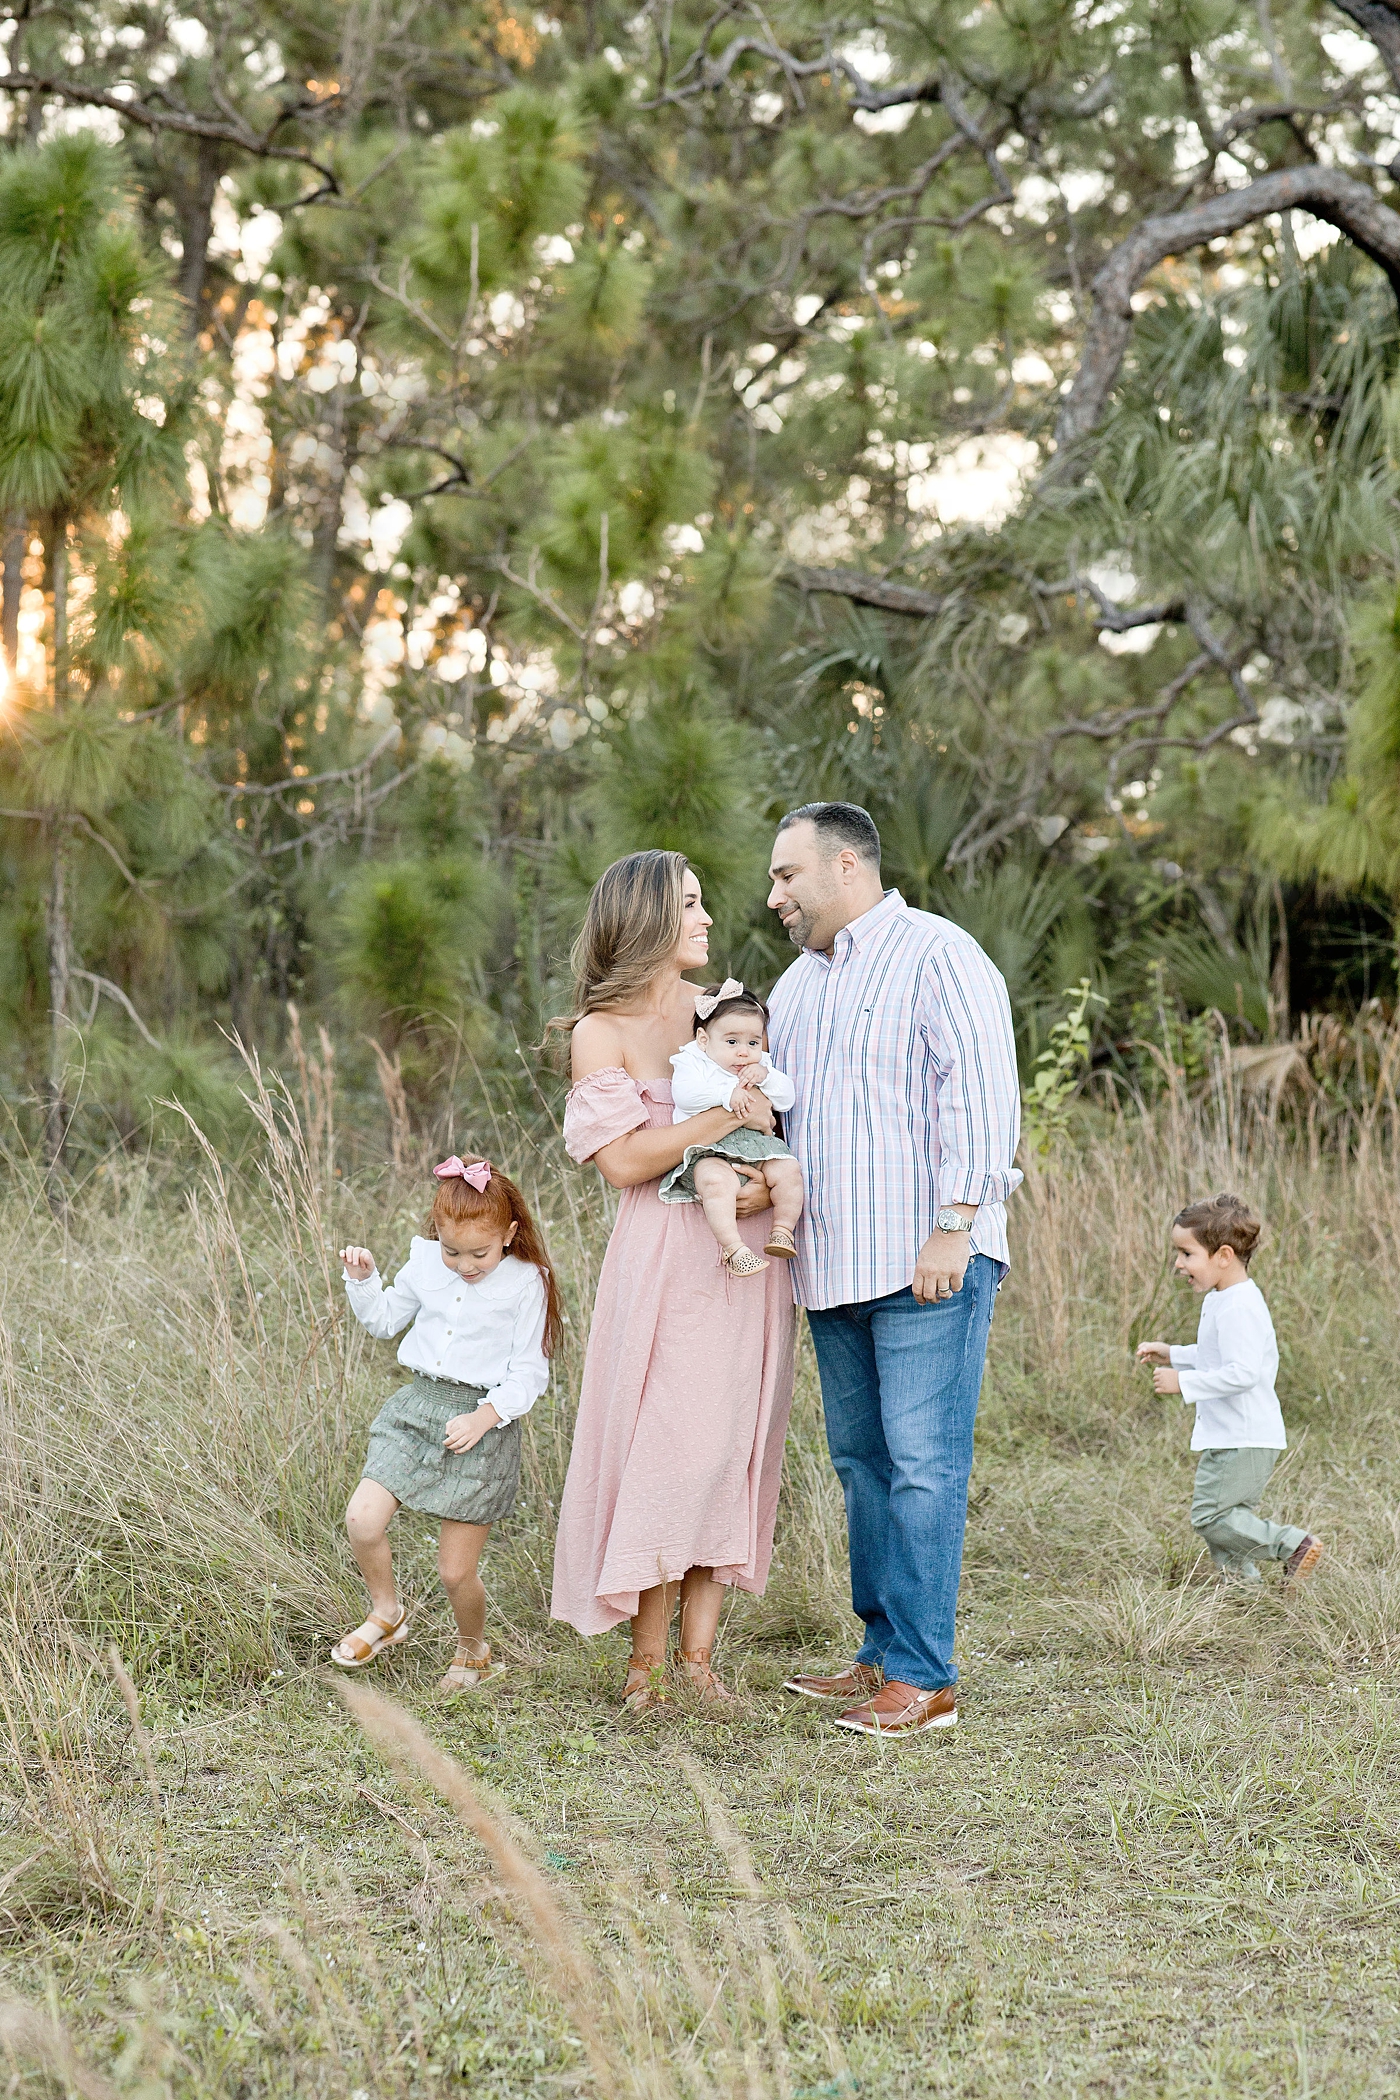 Children run in circles around their parents during Miami family photo session. Photo by Ivanna Vidal Photography.